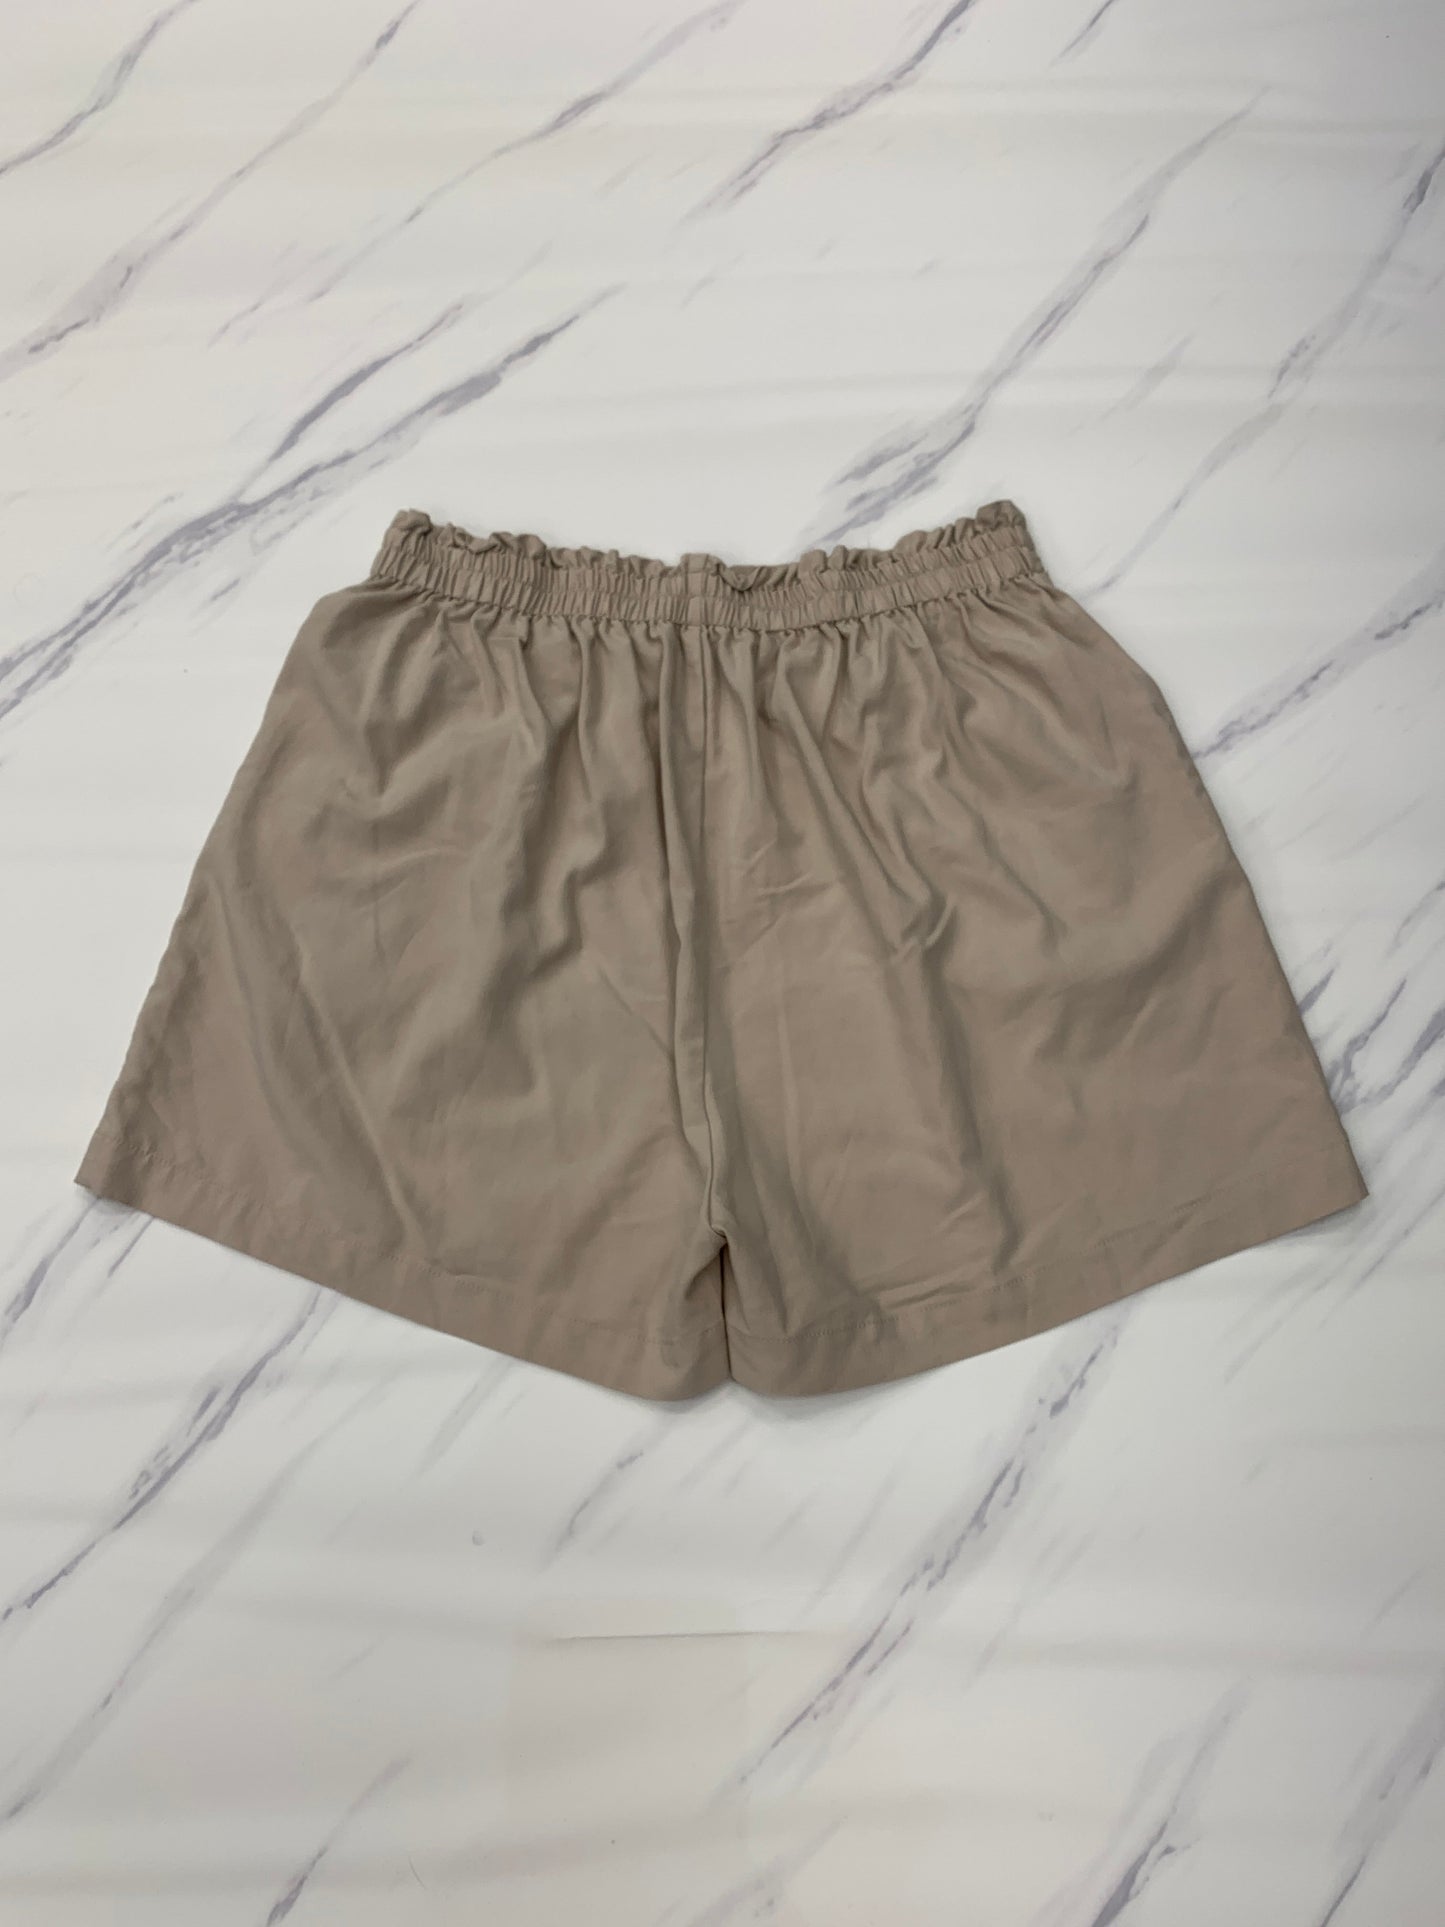 Shorts By Adrianna Papell  Size: M